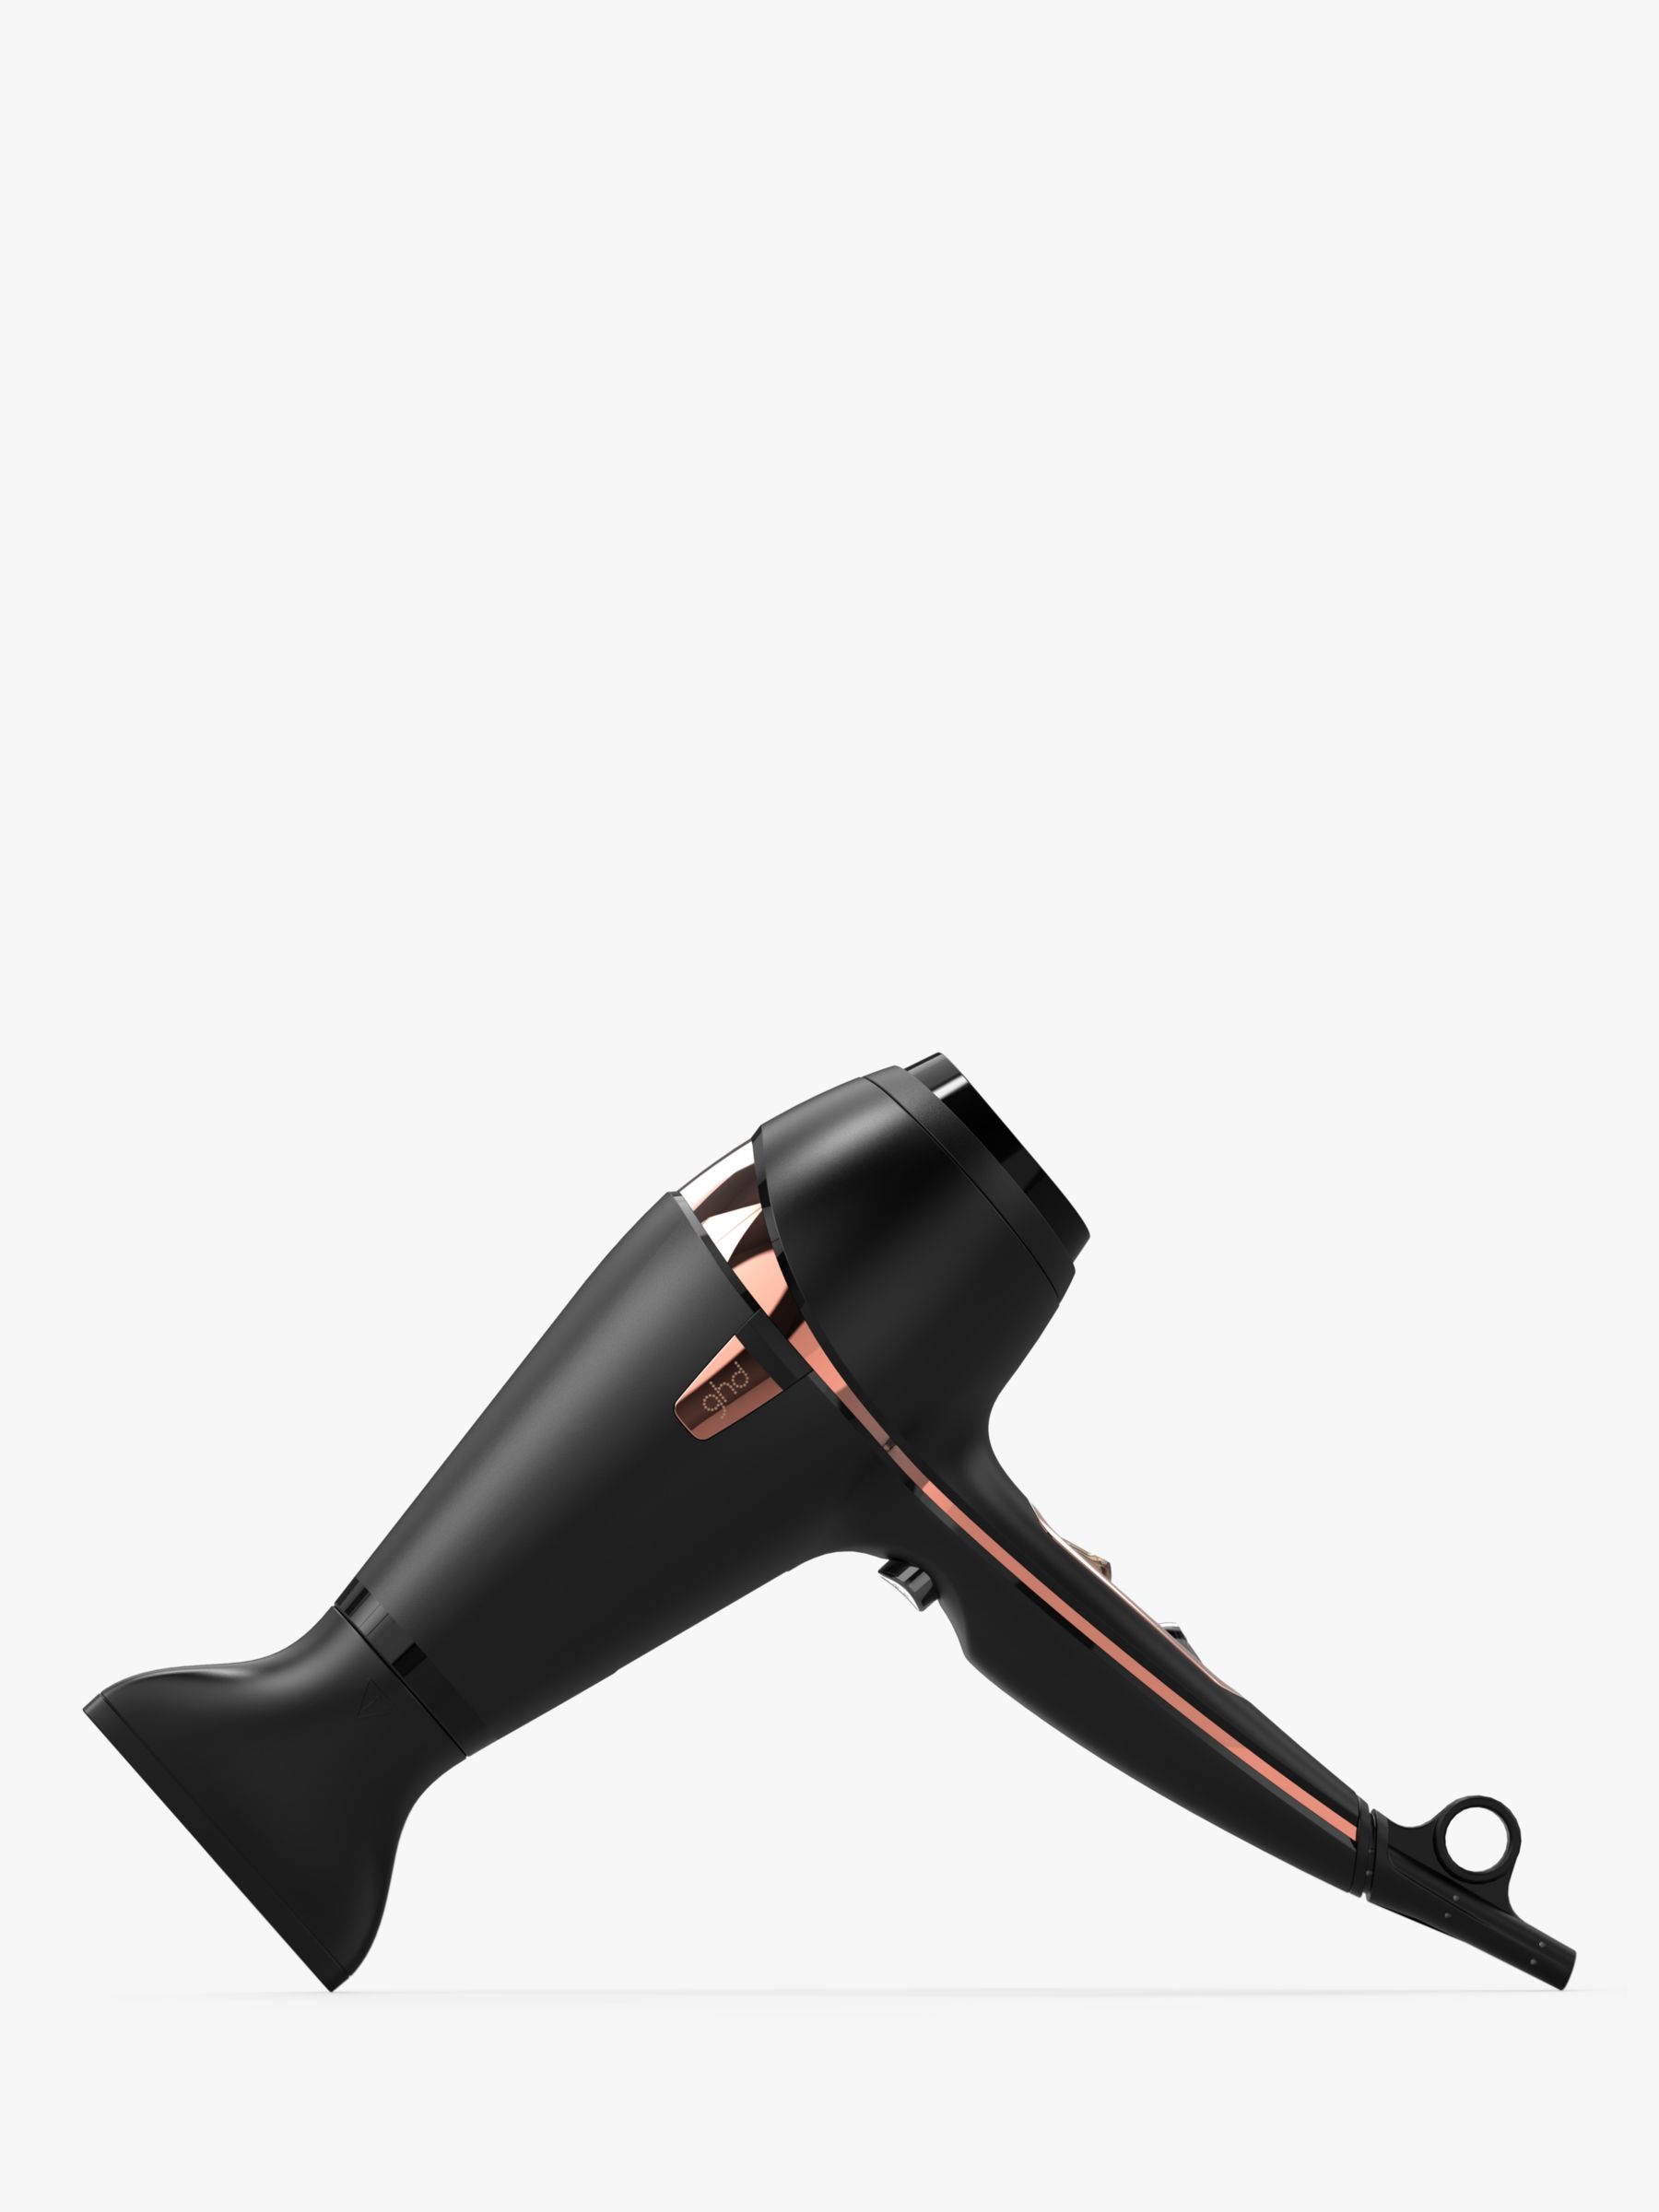 ghd Air® Hair Dryer Limited Edition Gift Set, Black/Rose Gold